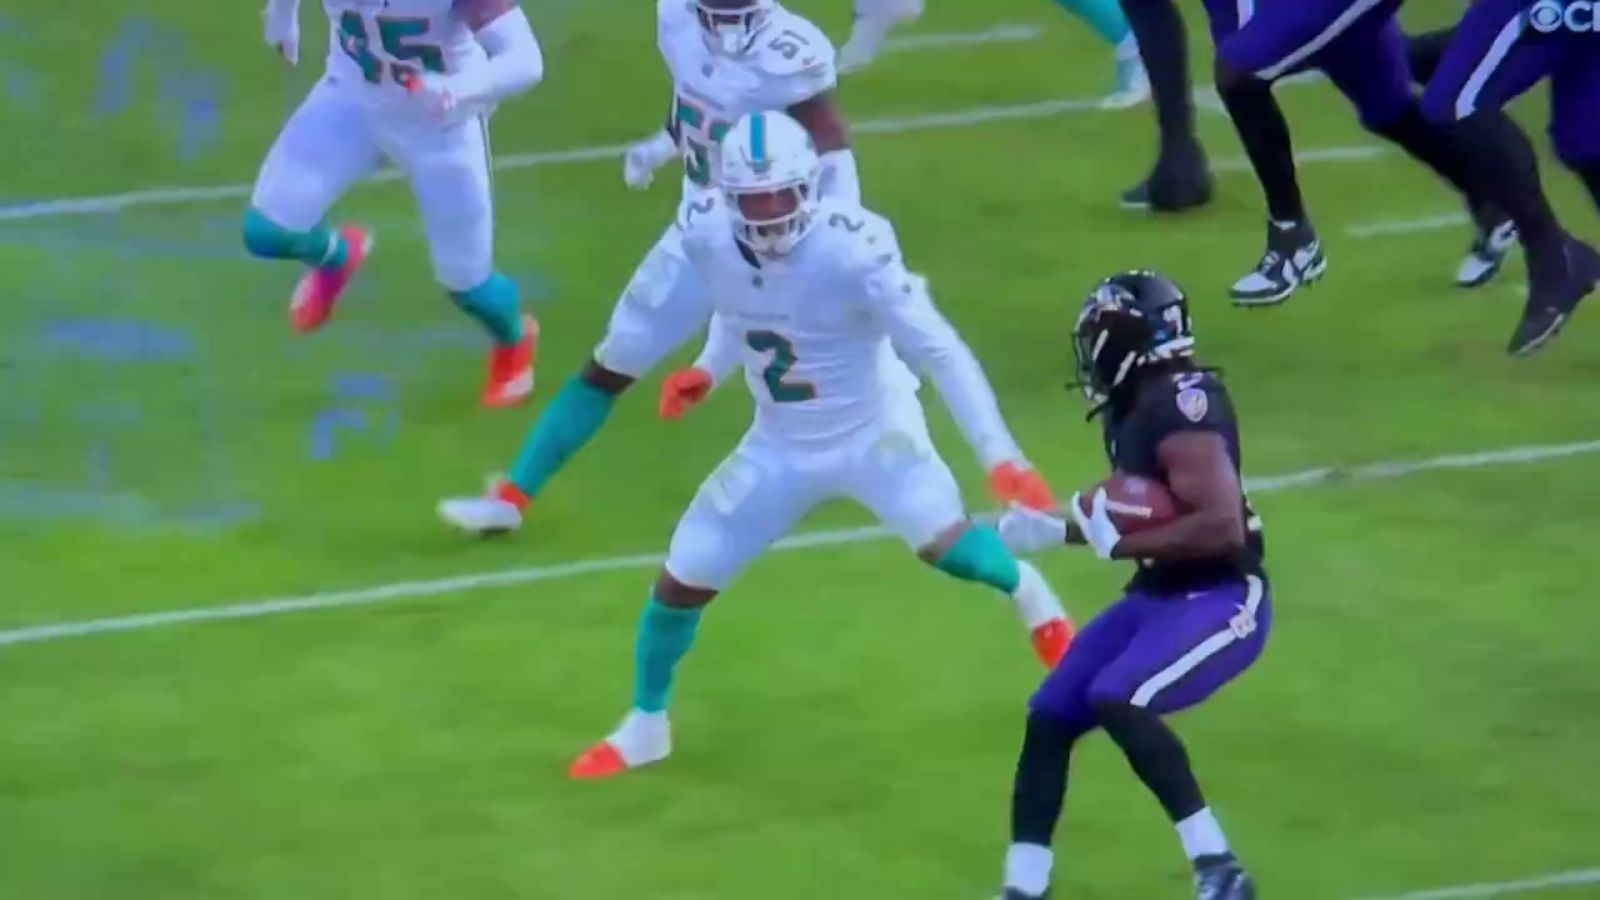 Clip Bradley Chubb suffered a knee injury during the Dolphins’ loss to the Ravens on Sunday, Clip Bradley Chubb injury, Video Bradley Chubb injury, NFL Highlights, NFL Soccer, Watch Video NFL Highlights, Video Highilghts NFL Soccer, NFL News HOT Video, Collection Video NFL, Dolphins star feared to have torn ACL after garbage time injury disaster, MIAMI DOLPHINS, MIKE MCDANIEL